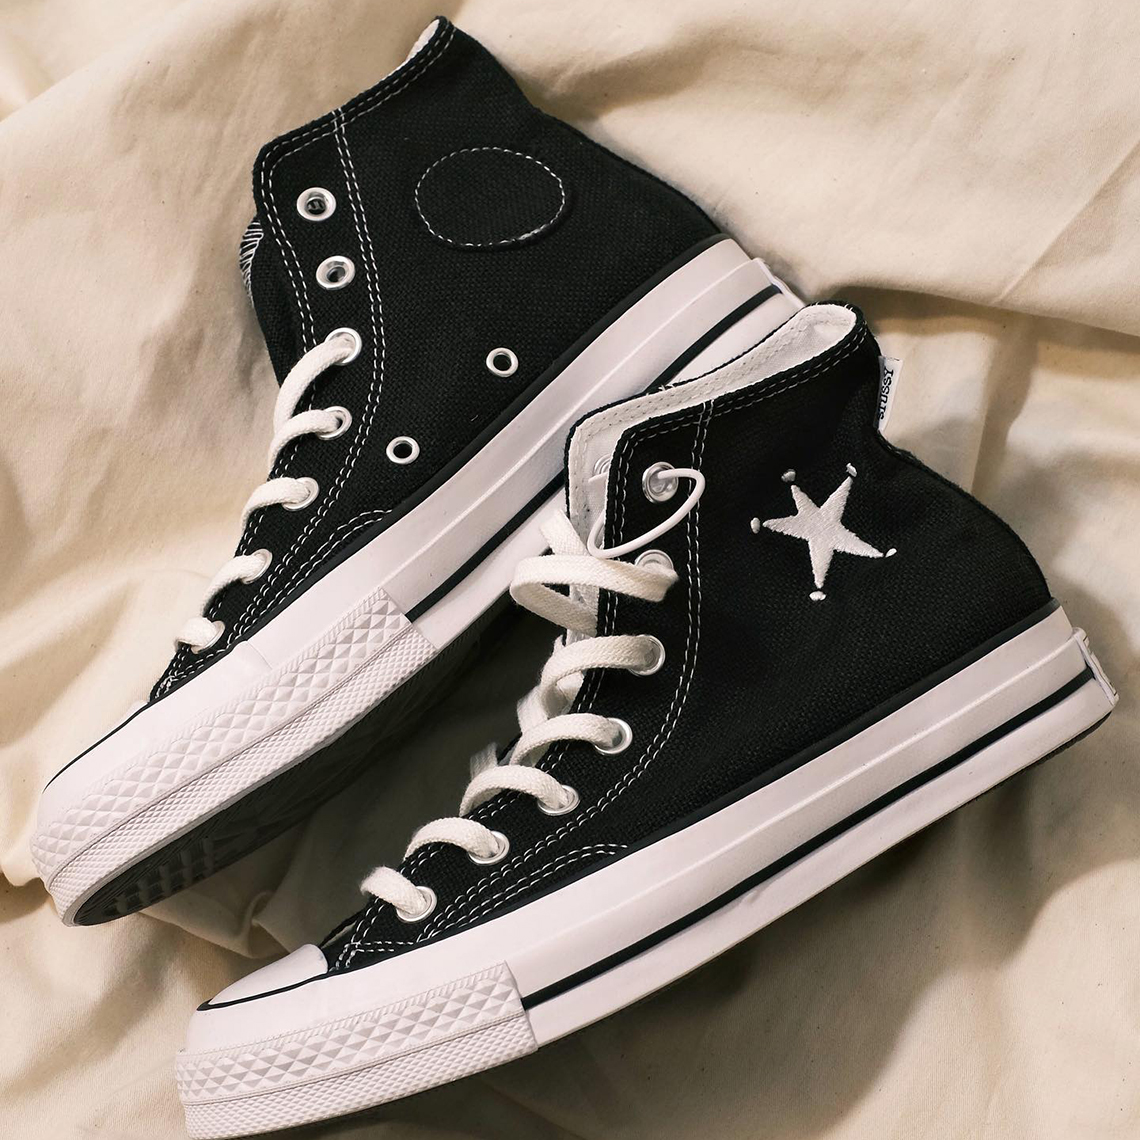 Stussy Converse Chuck 70 First Look 9